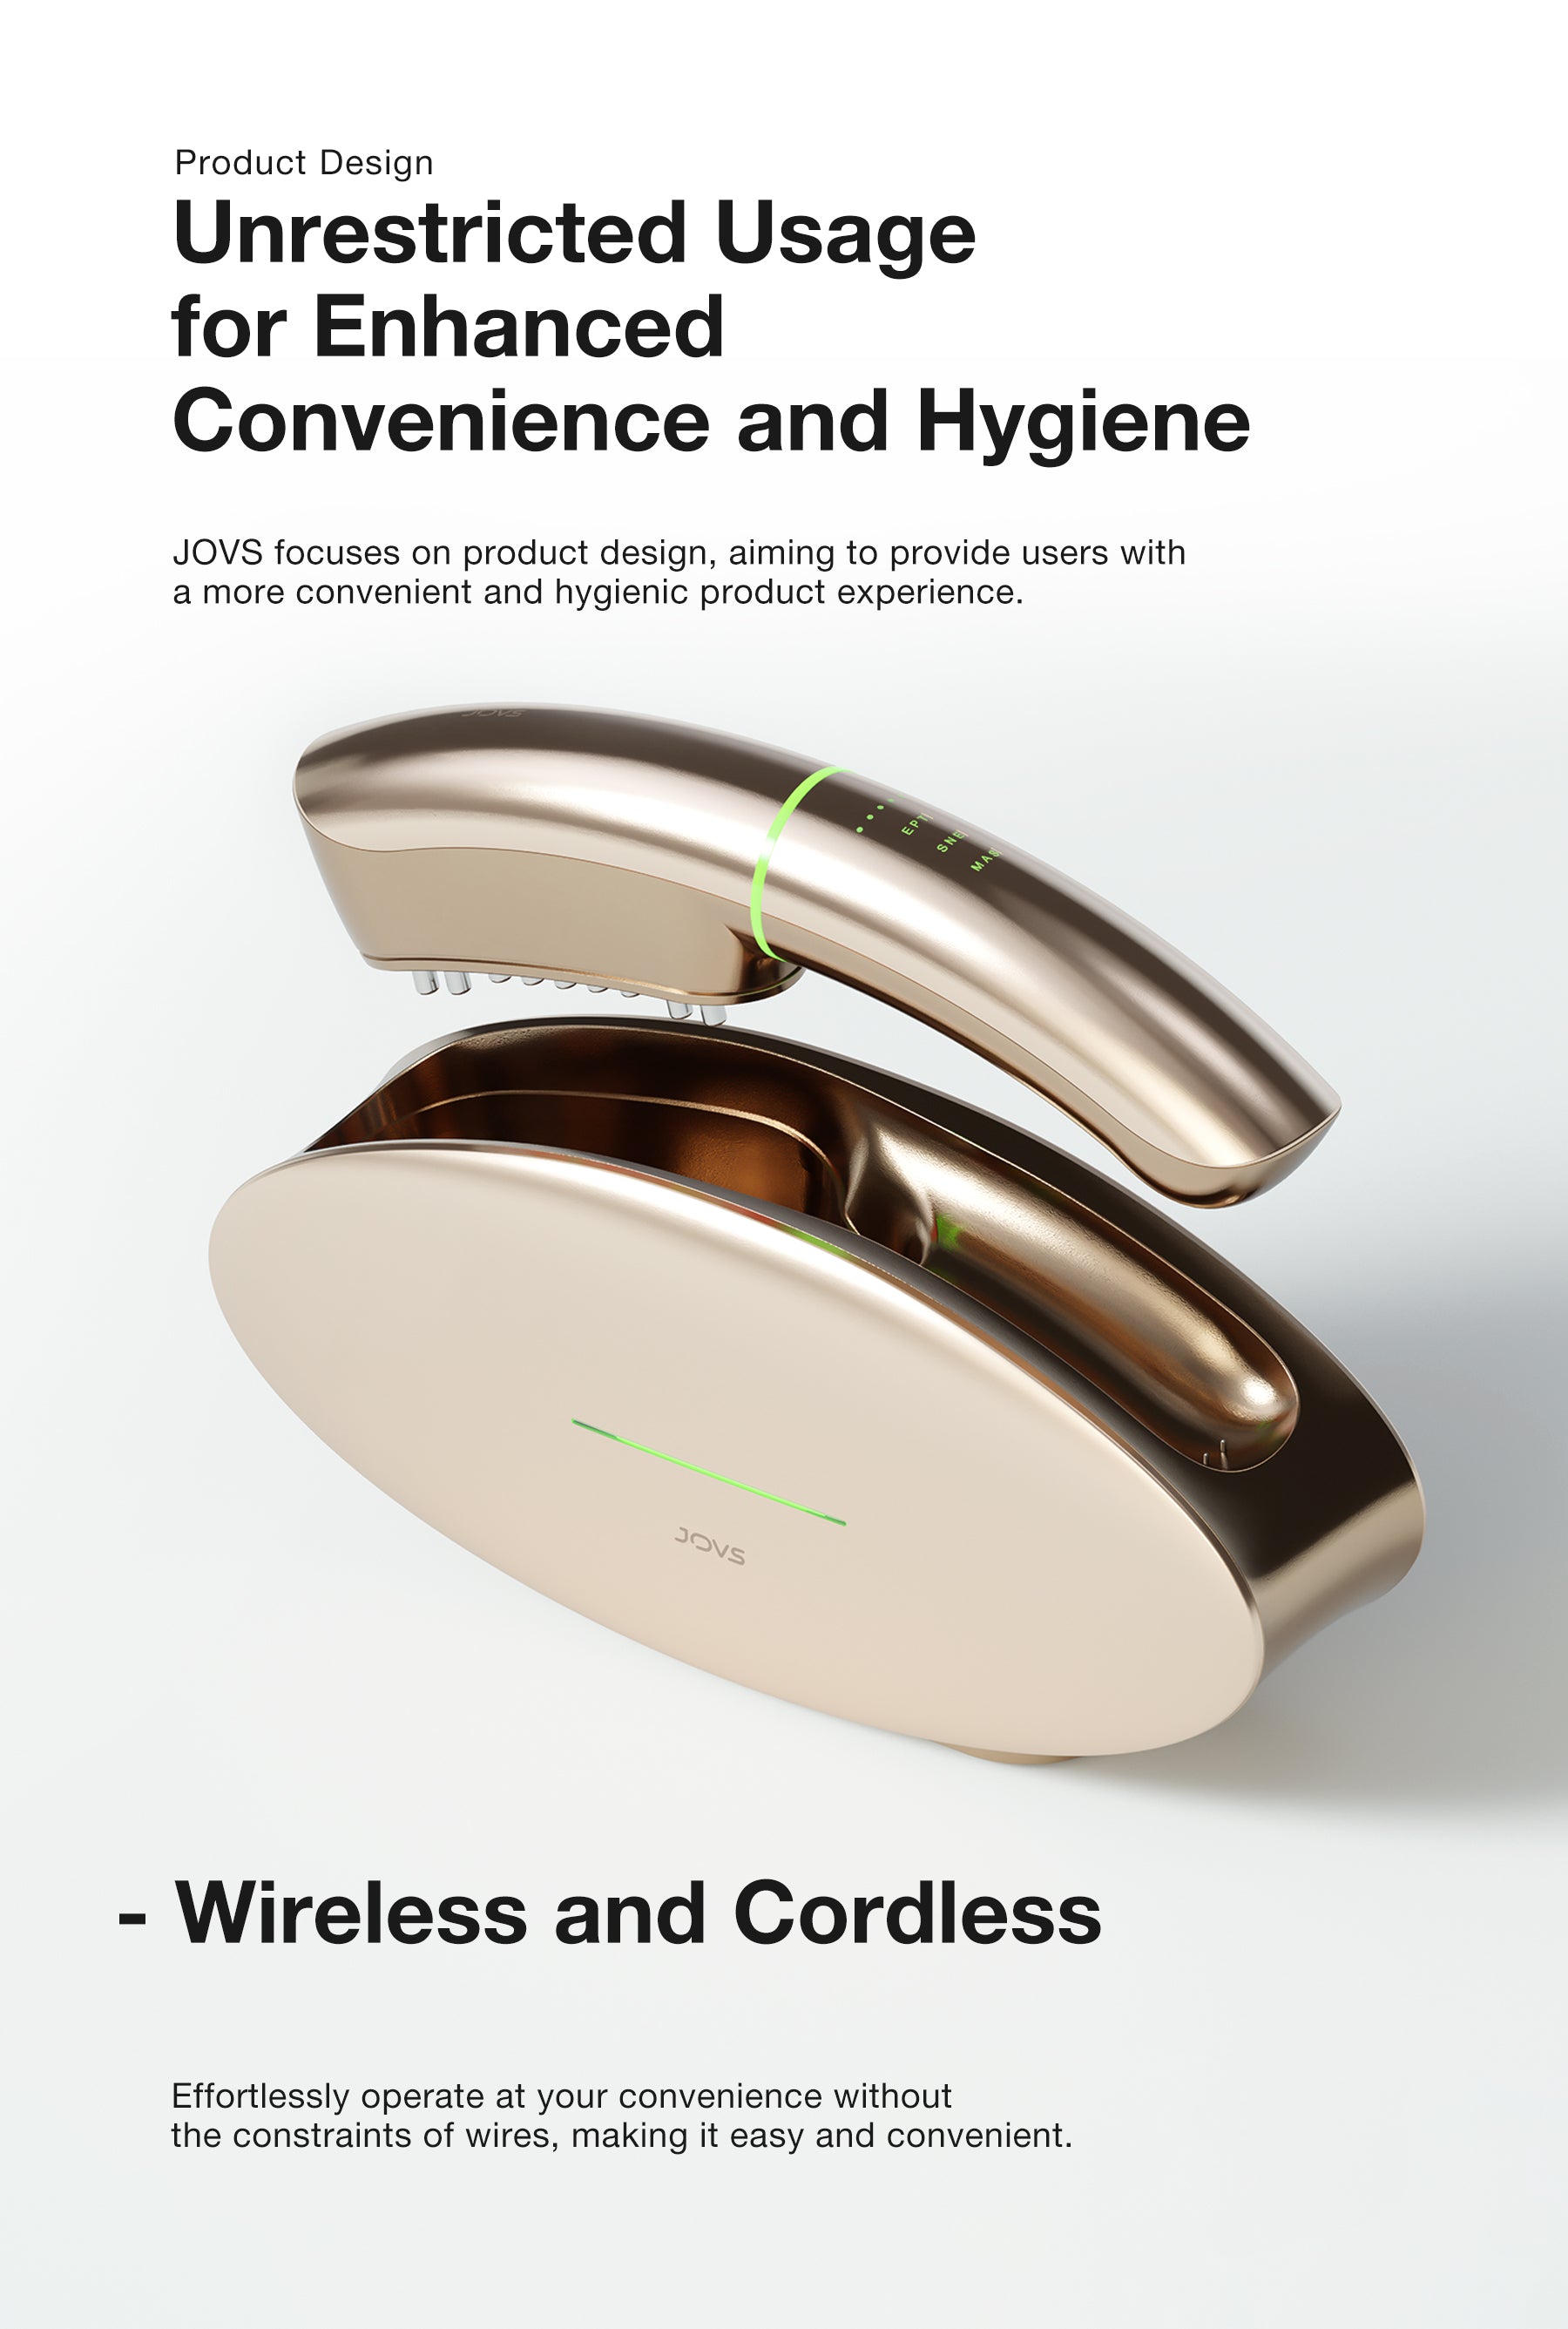 JOVS Slimax Microcurrent Anti-aging Device showcasing wireless and cordless design for enhanced convenience and hygiene.